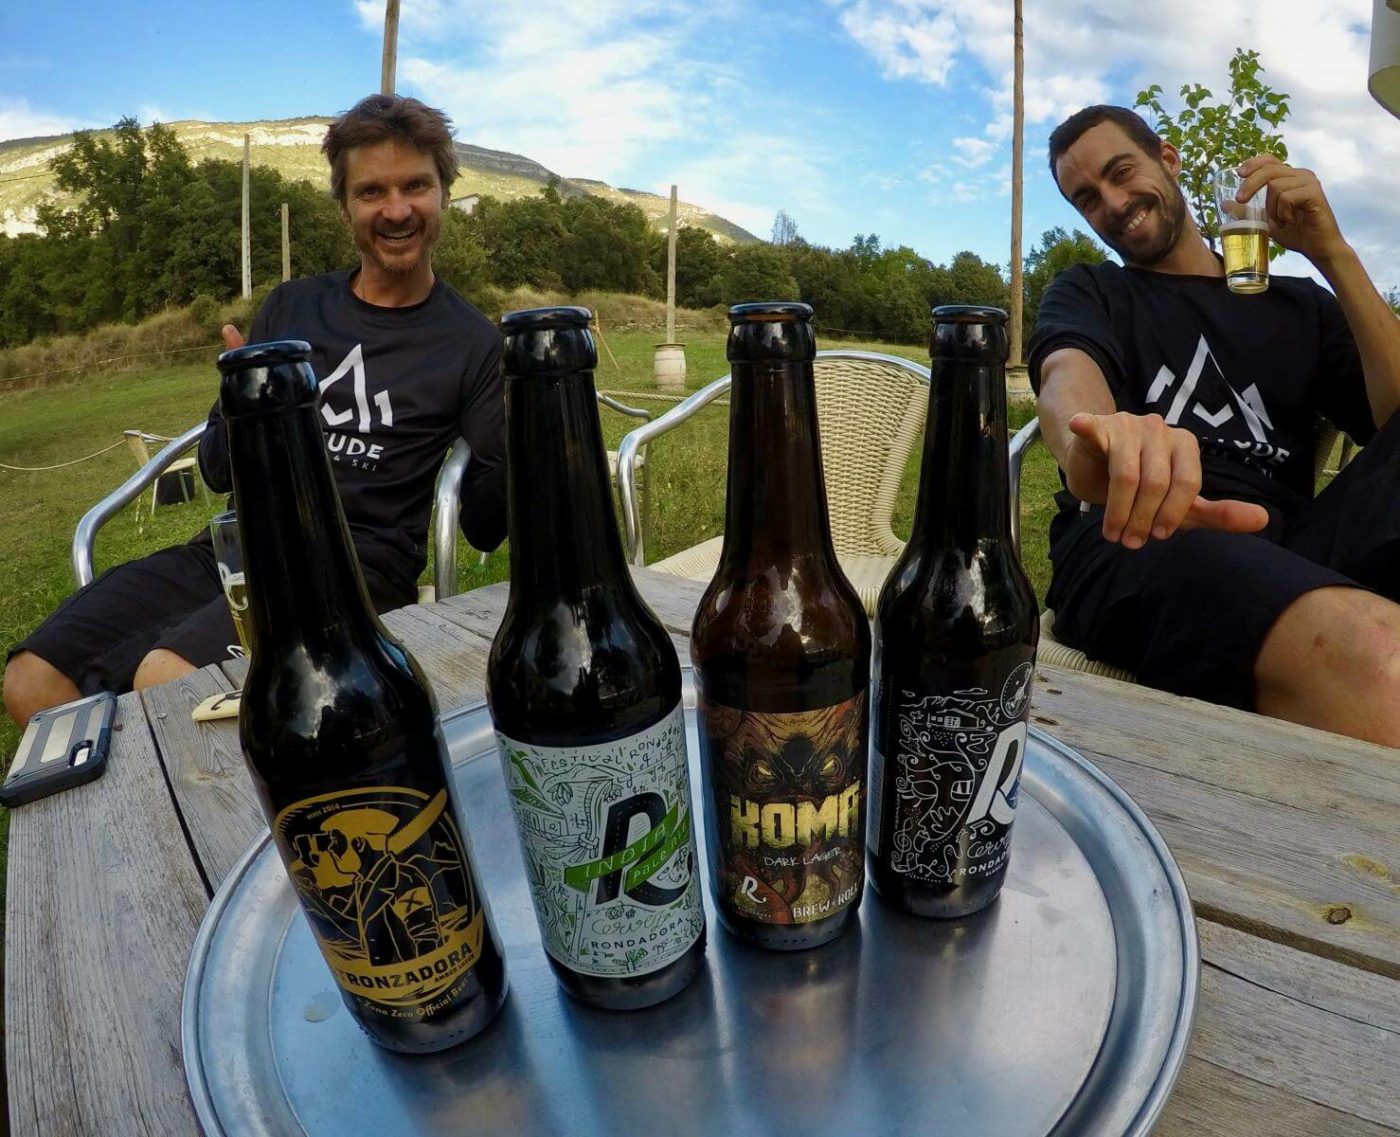 Two smiling mountain bike riders from the tour relaxing with beer.